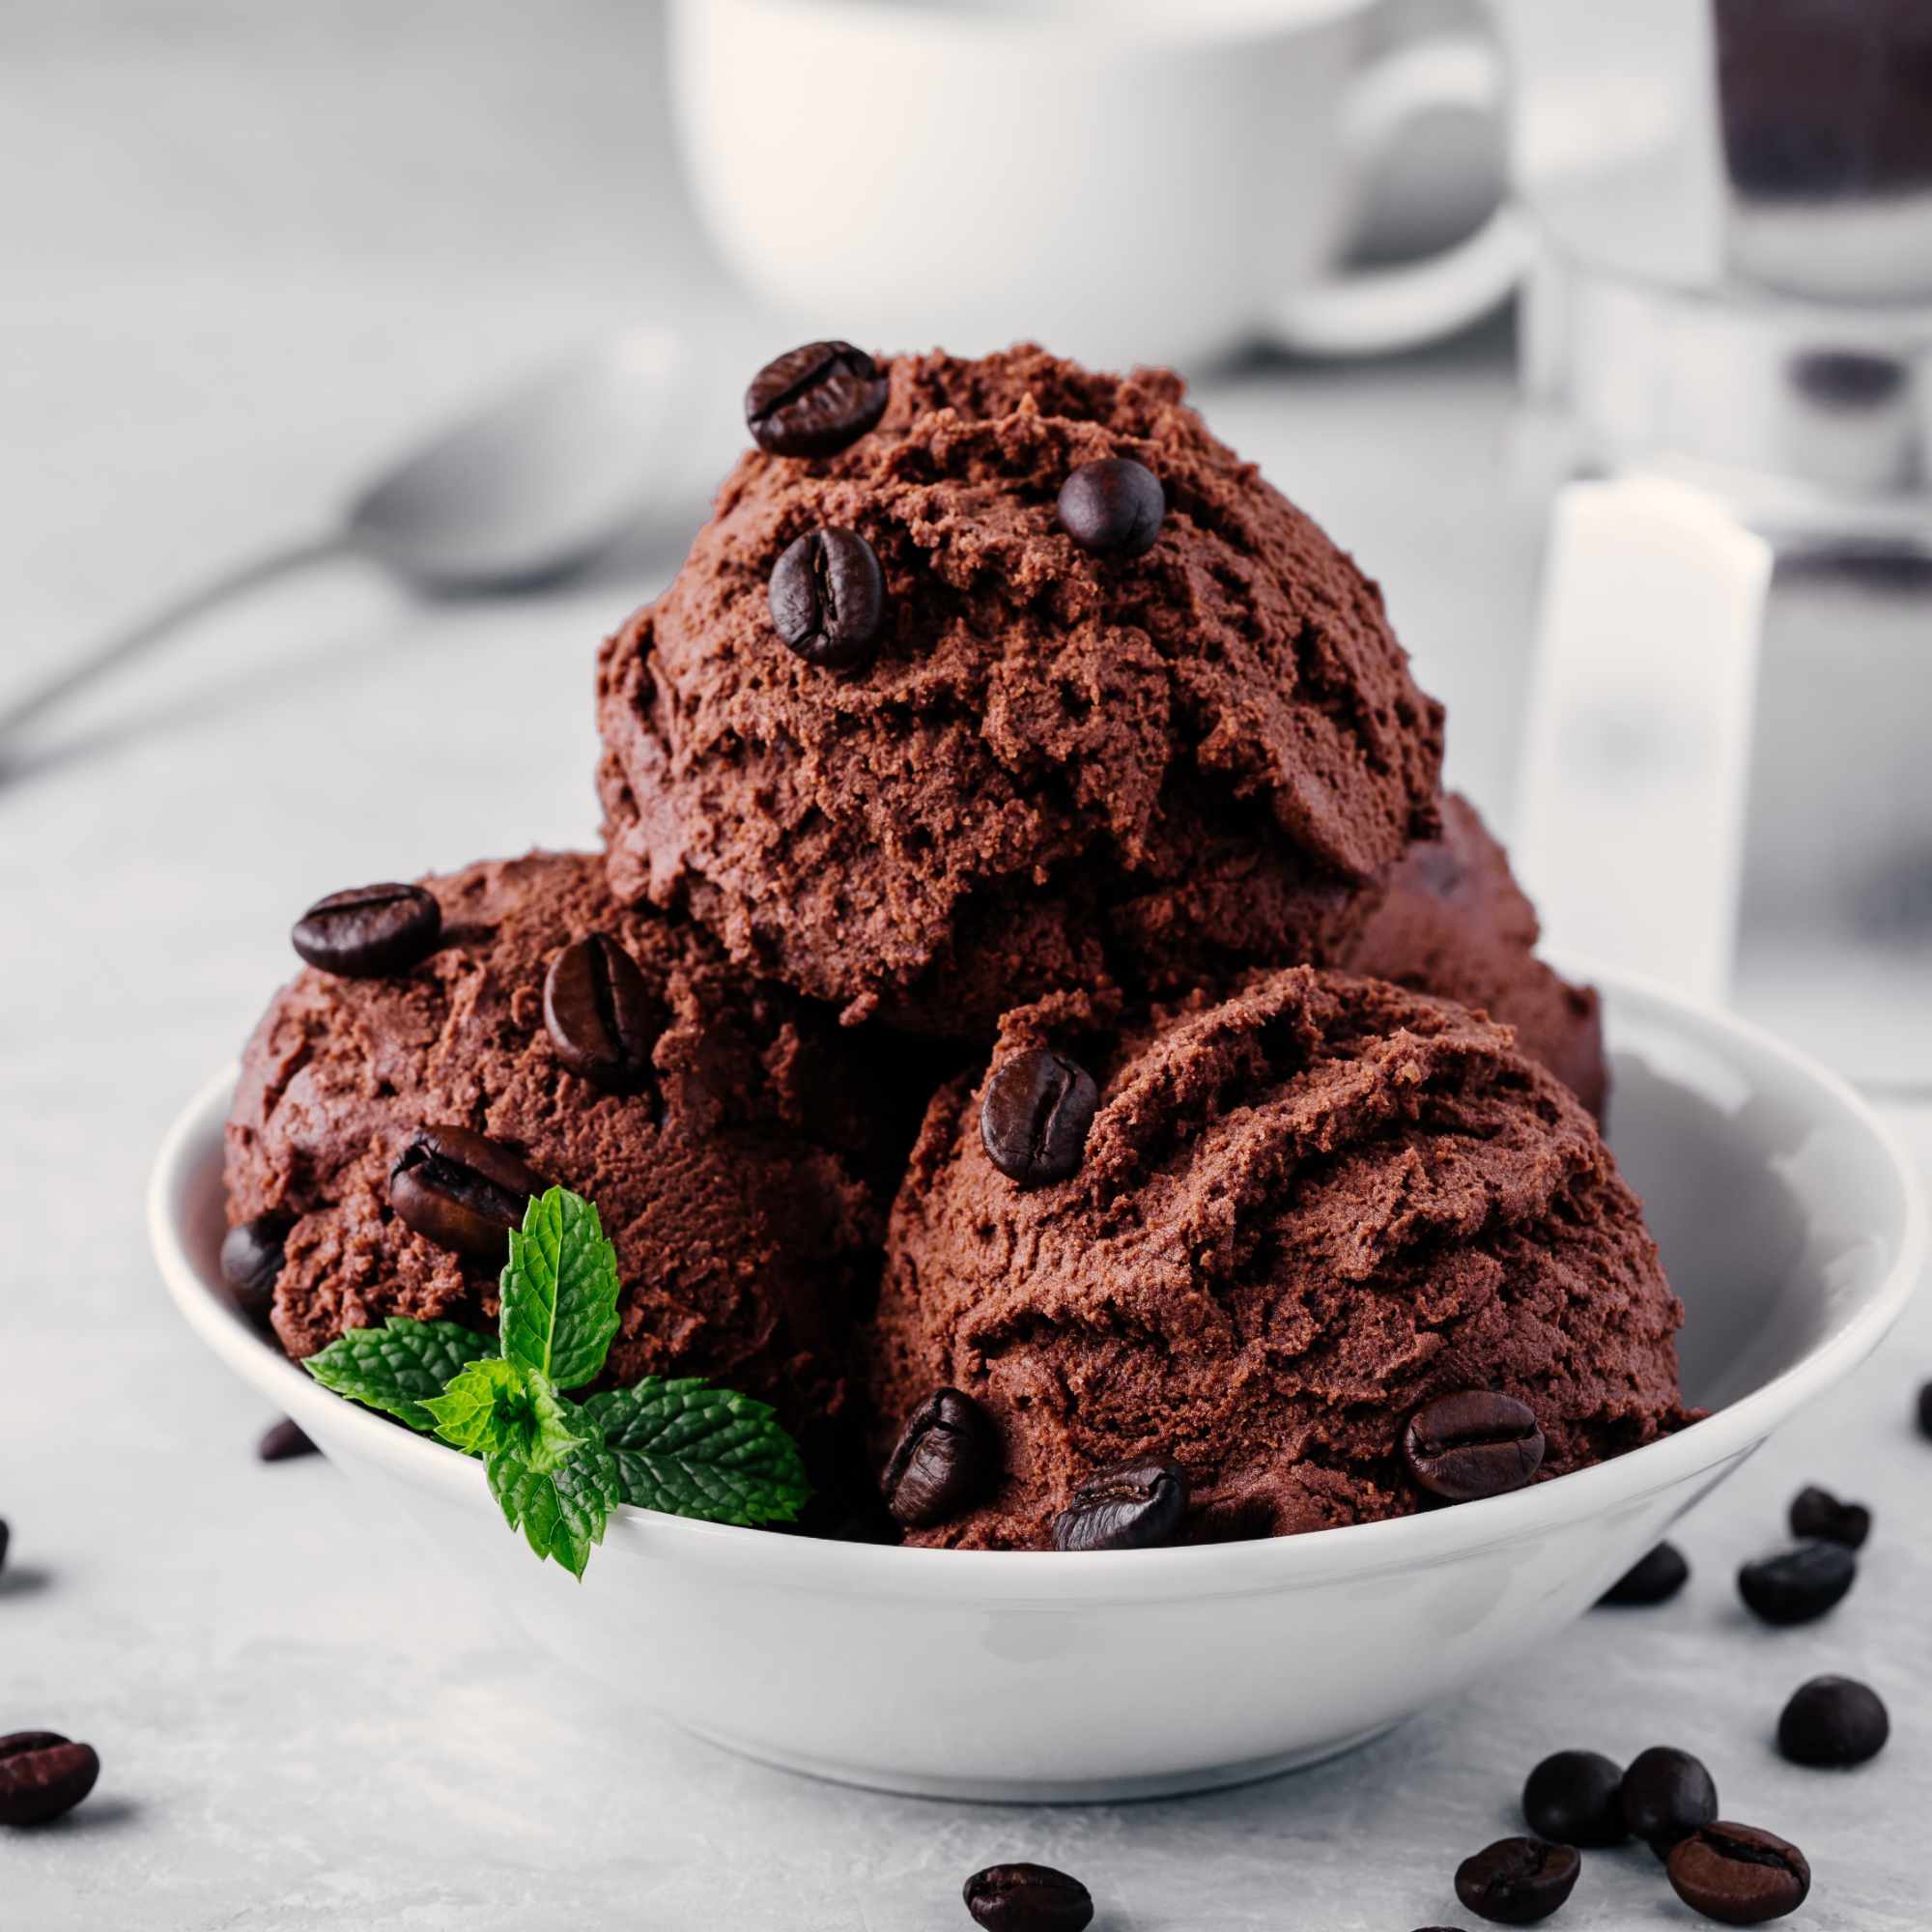 a-bowl-of-chocolate-coffee-ice-cream-scoops-with-m-P8TWFH9.jpg